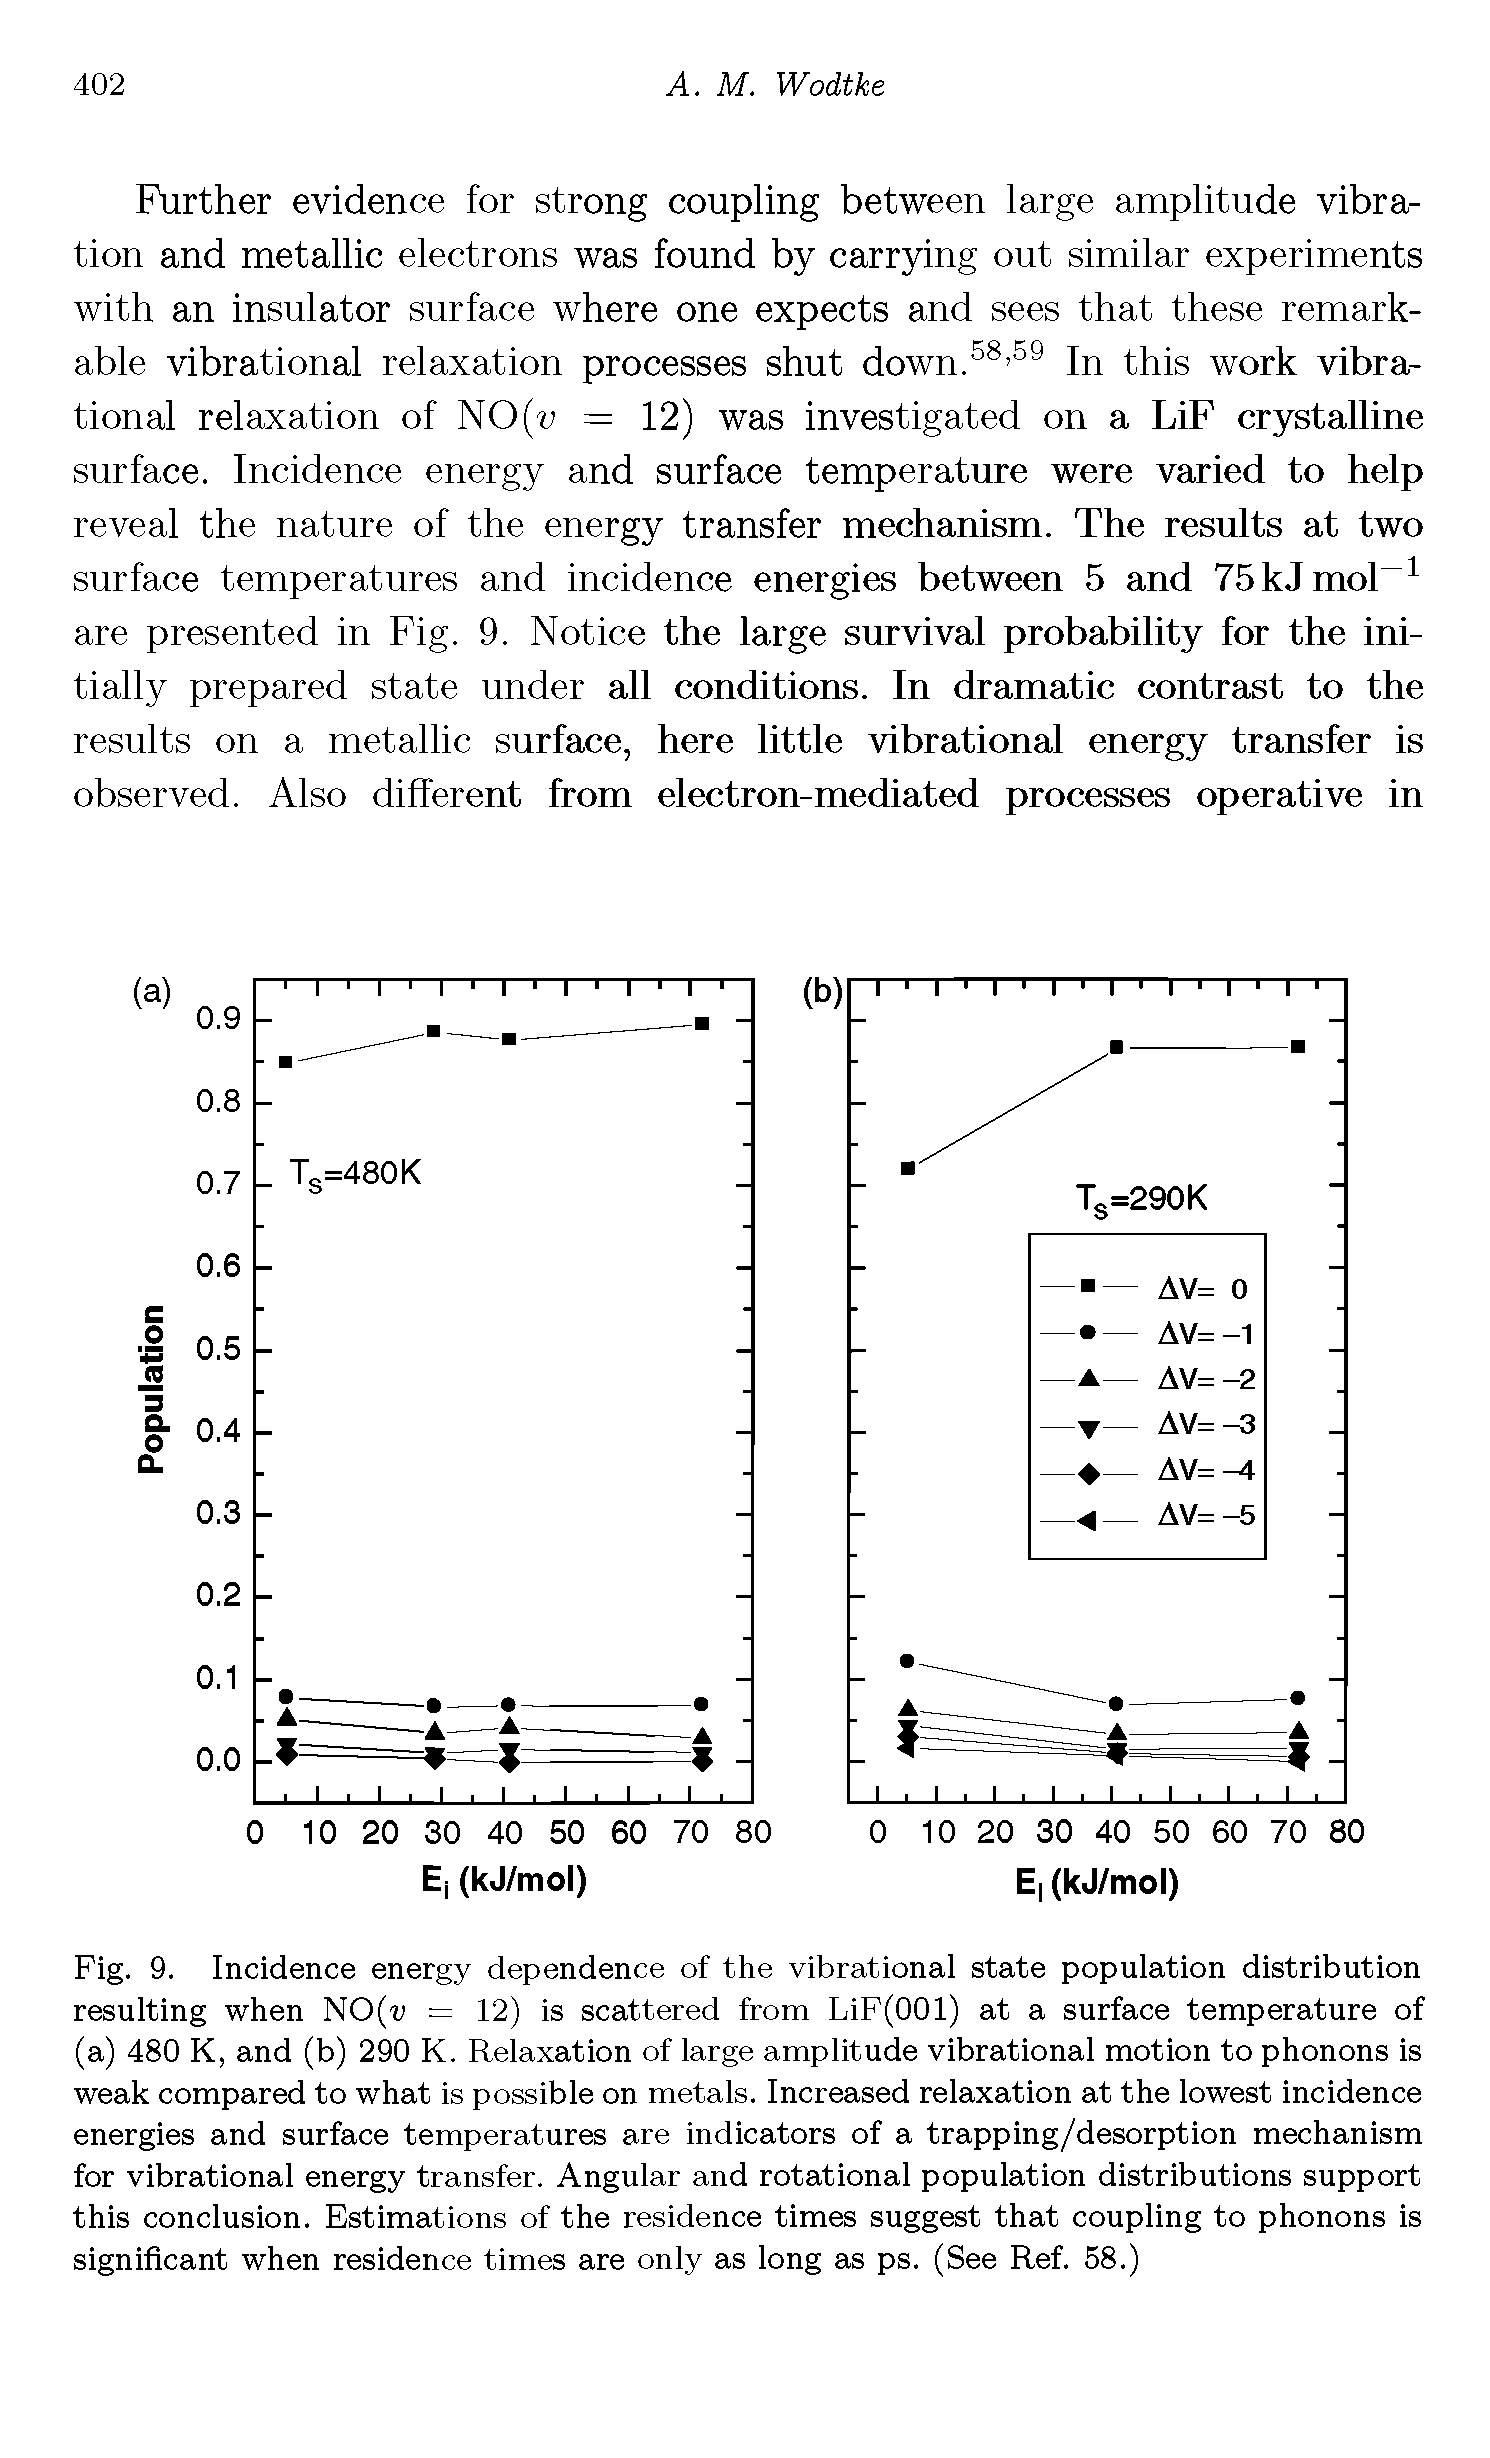 Fig. 9. Incidence energy dependence of the vibrational state population distribution resulting when NO(u = 12) is scattered from LiF(OOl) at a surface temperature of (a) 480 K, and (b) 290 K. Relaxation of large amplitude vibrational motion to phonons is weak compared to what is possible on metals. Increased relaxation at the lowest incidence energies and surface temperatures are indicators of a trapping/desorption mechanism for vibrational energy transfer. Angular and rotational population distributions support this conclusion. Estimations of the residence times suggest that coupling to phonons is significant when residence times are only as long as ps. (See Ref. 58.)...